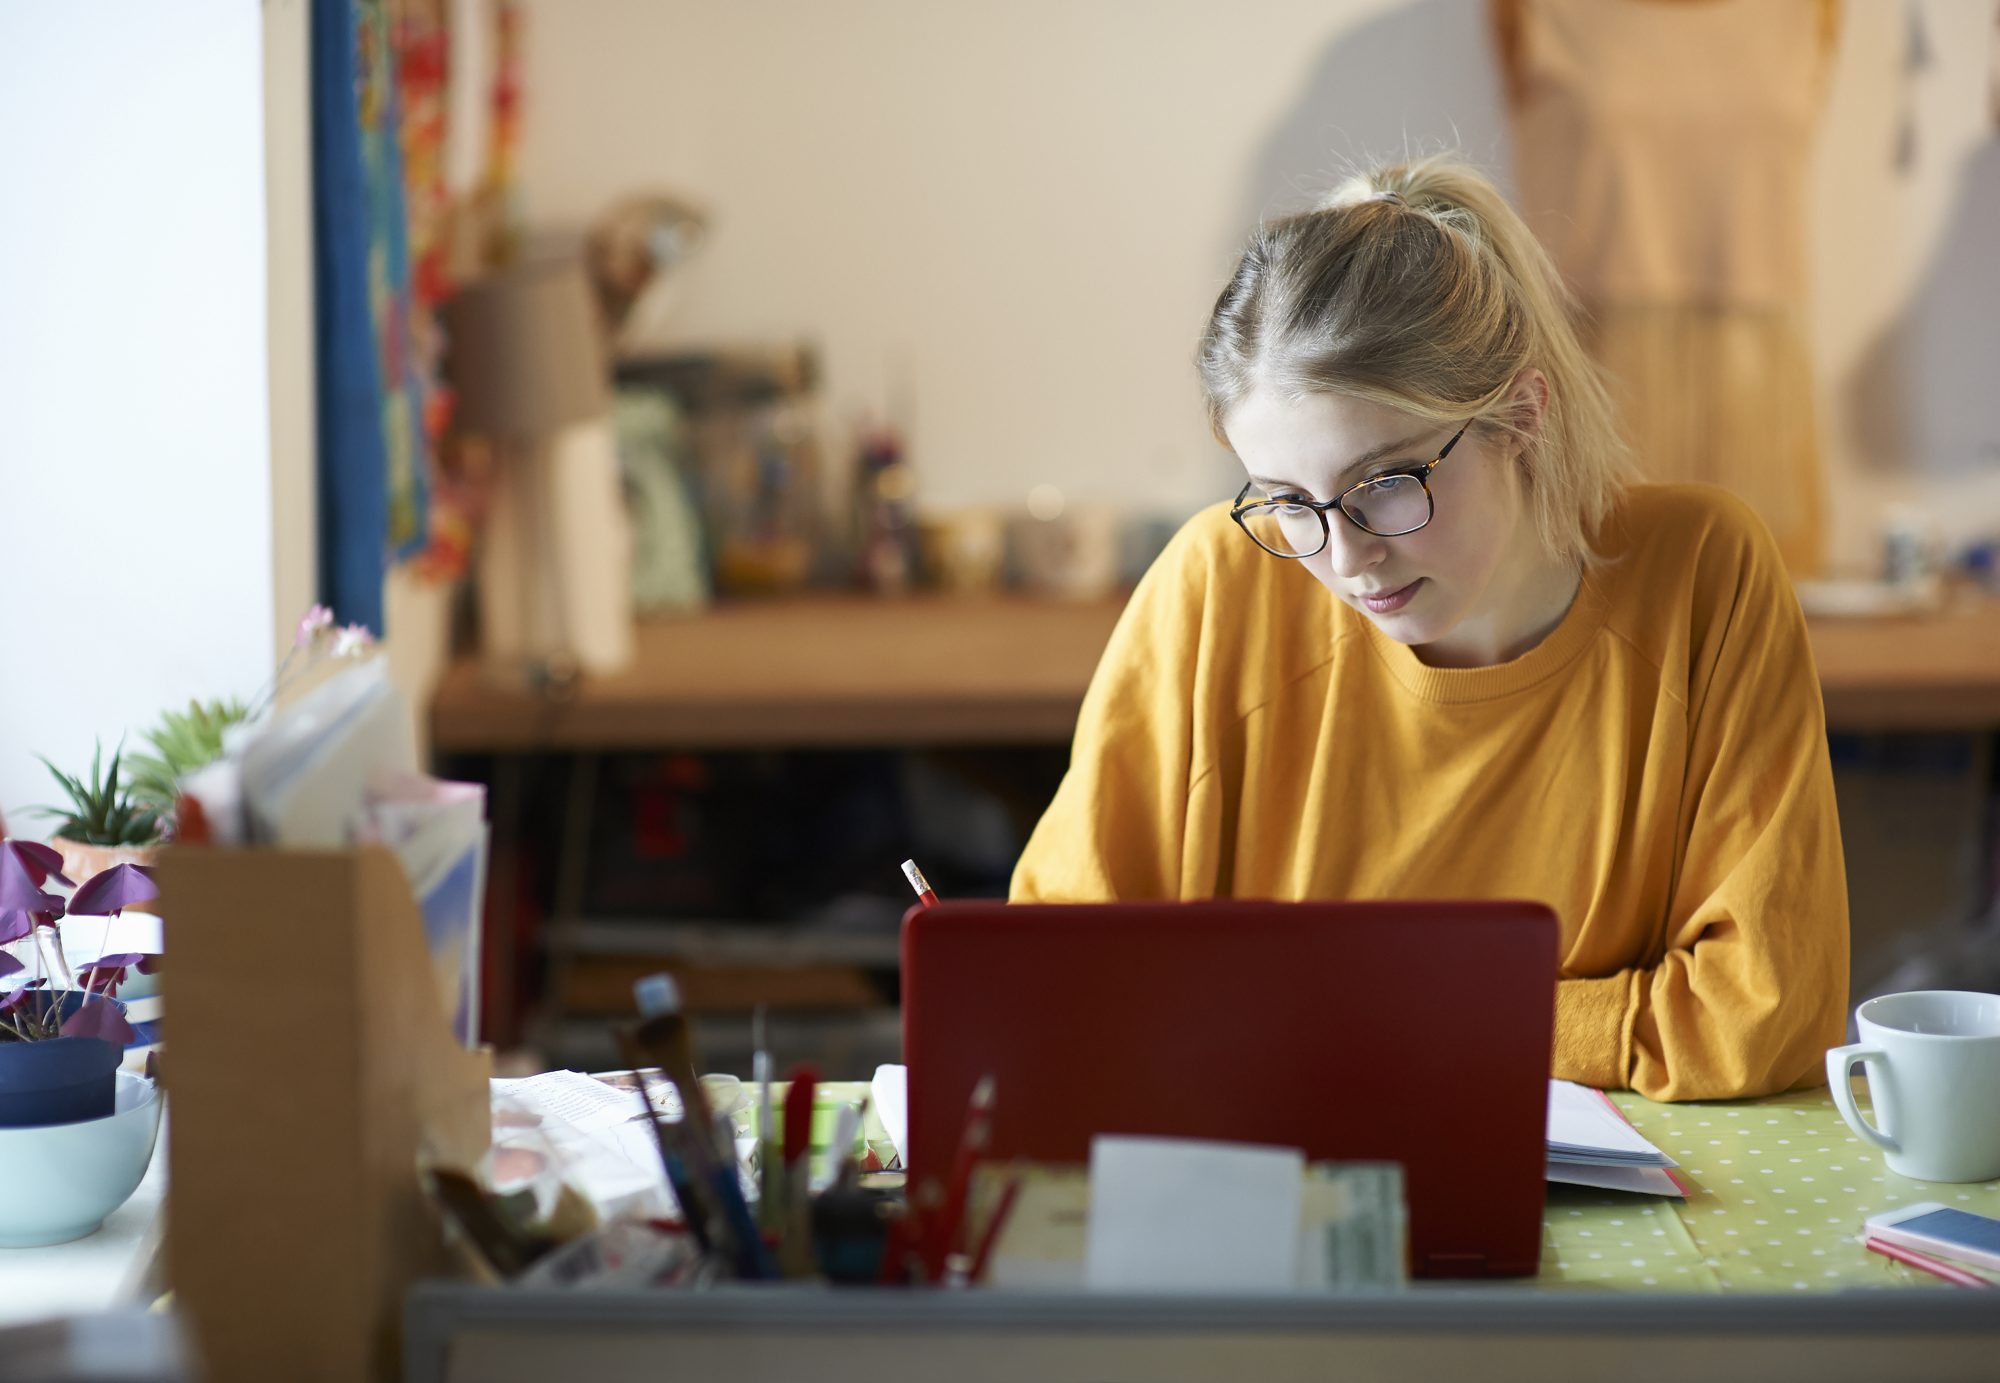 Fair-haired woman working on laptop at home